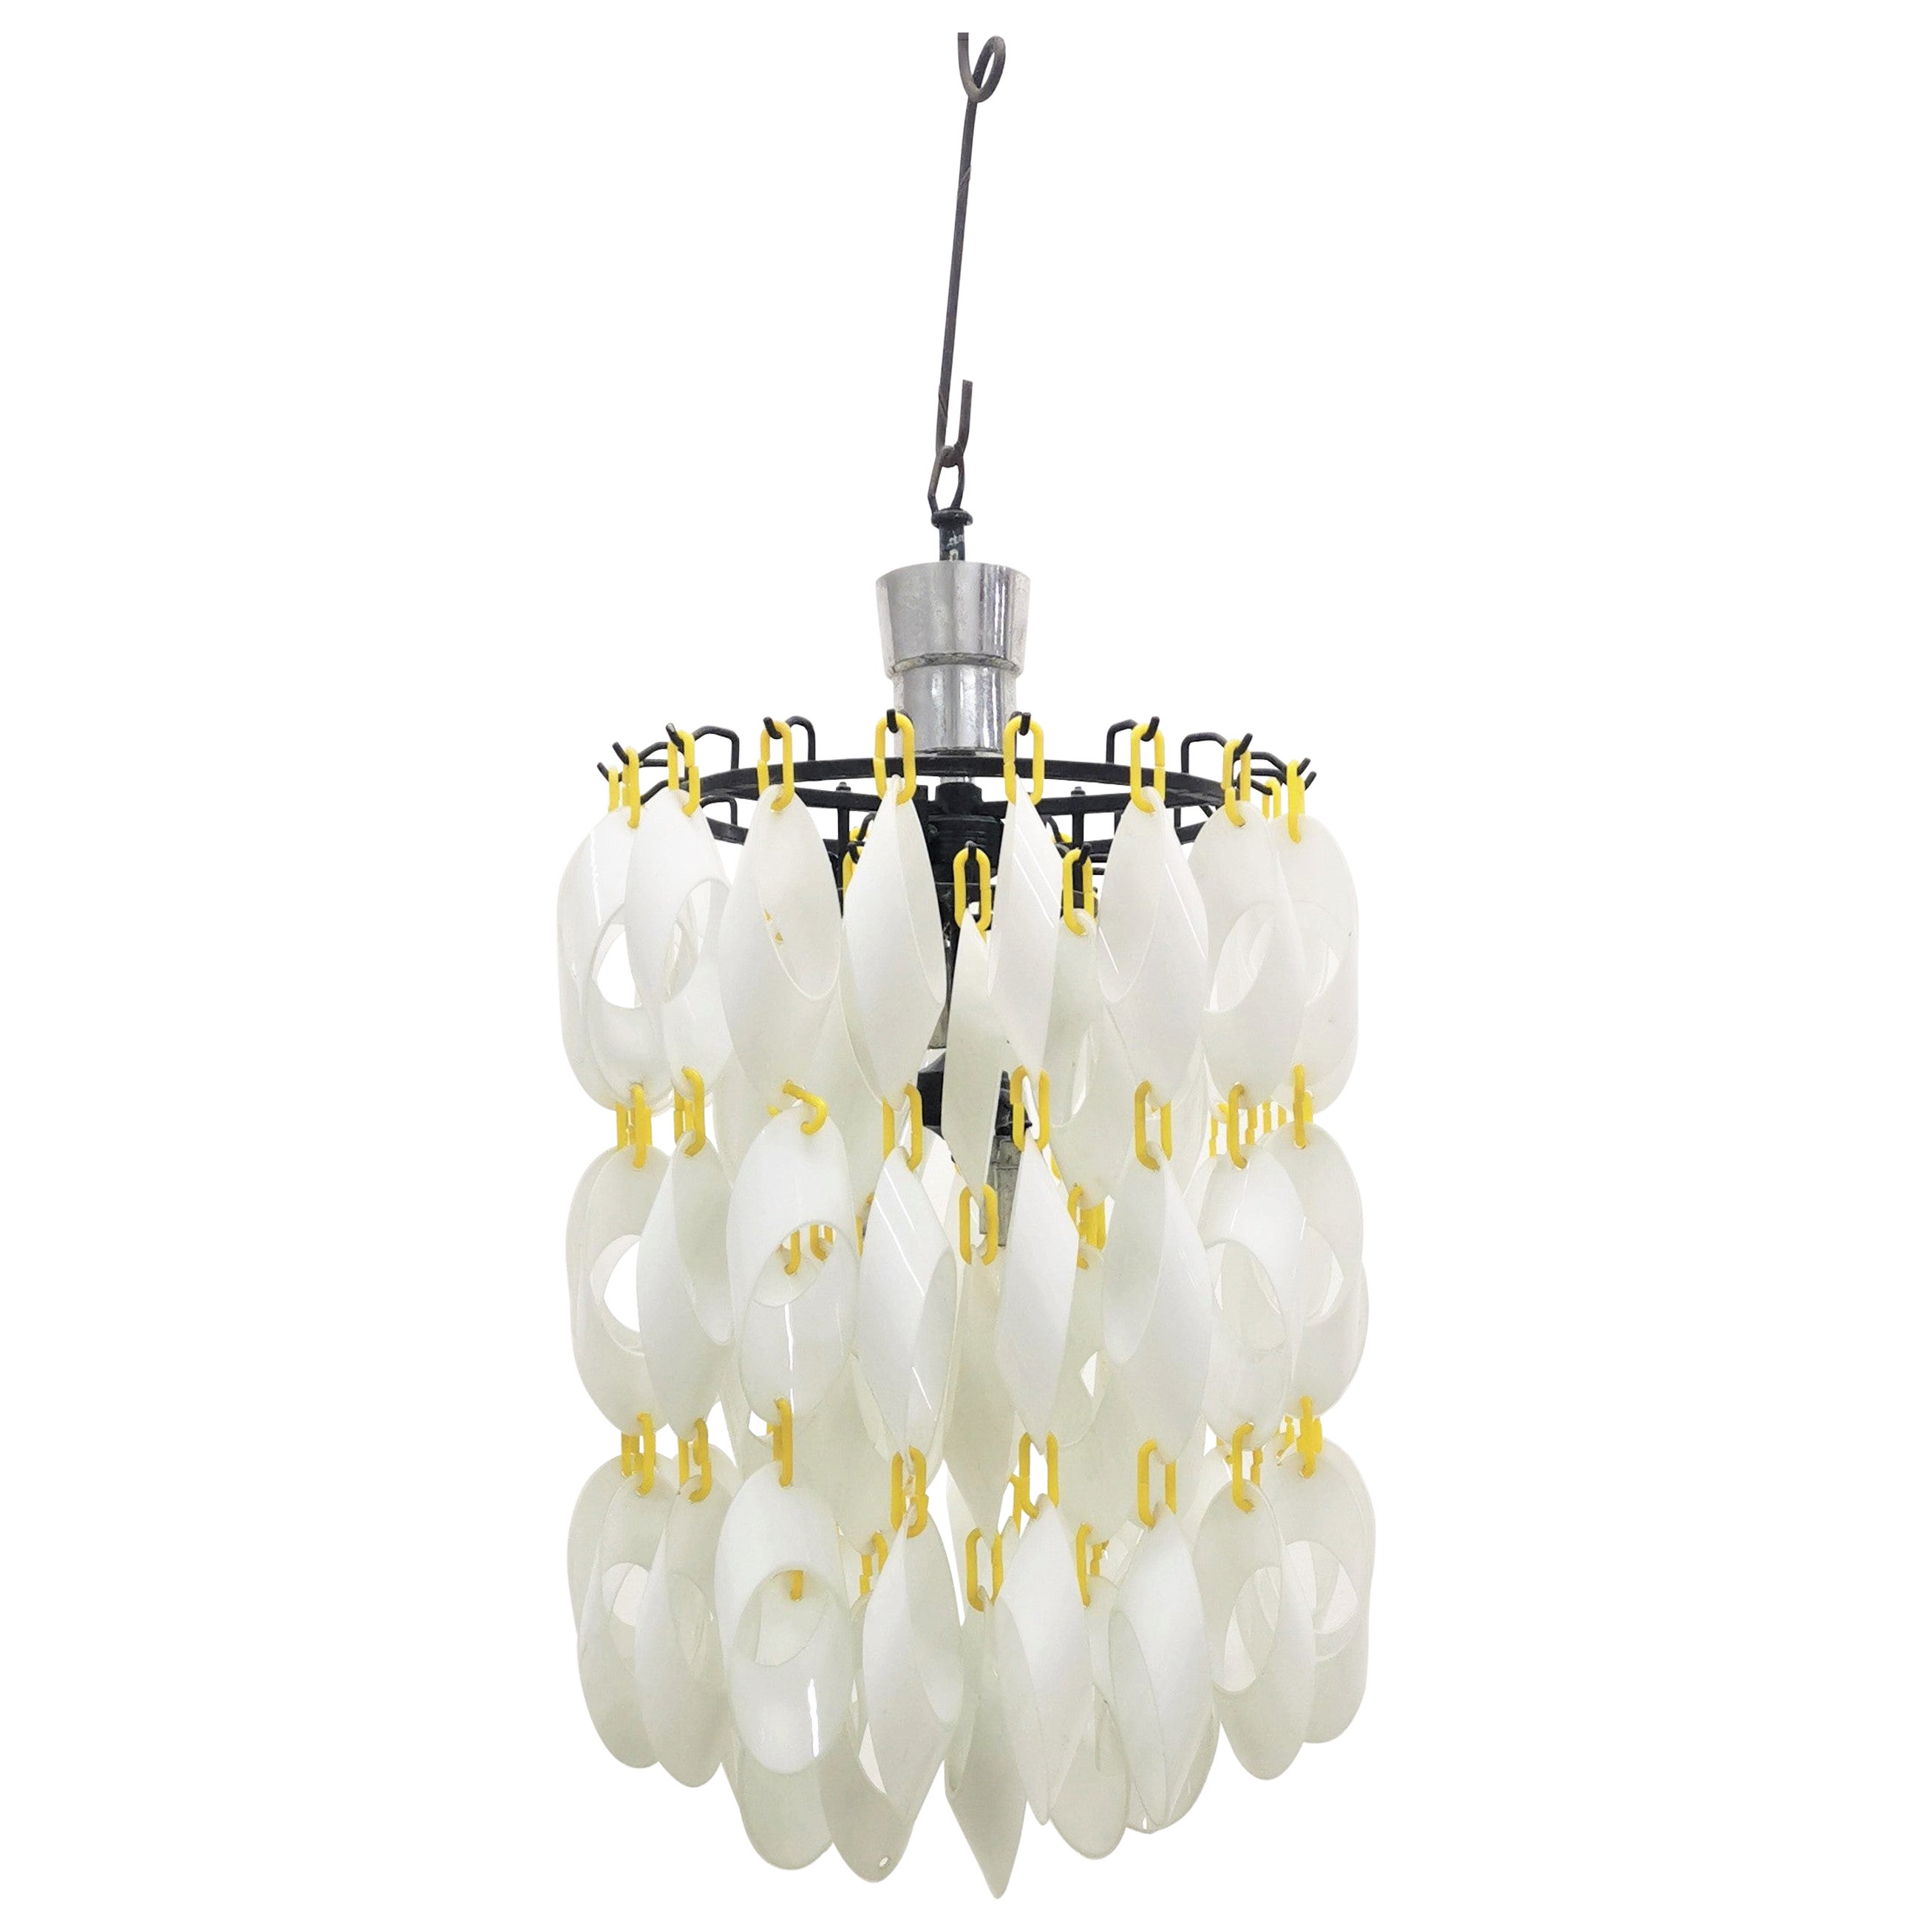 Mid-Century Vistosi Glass Chandelier Made of Modular Elements 1960s Italy For Sale